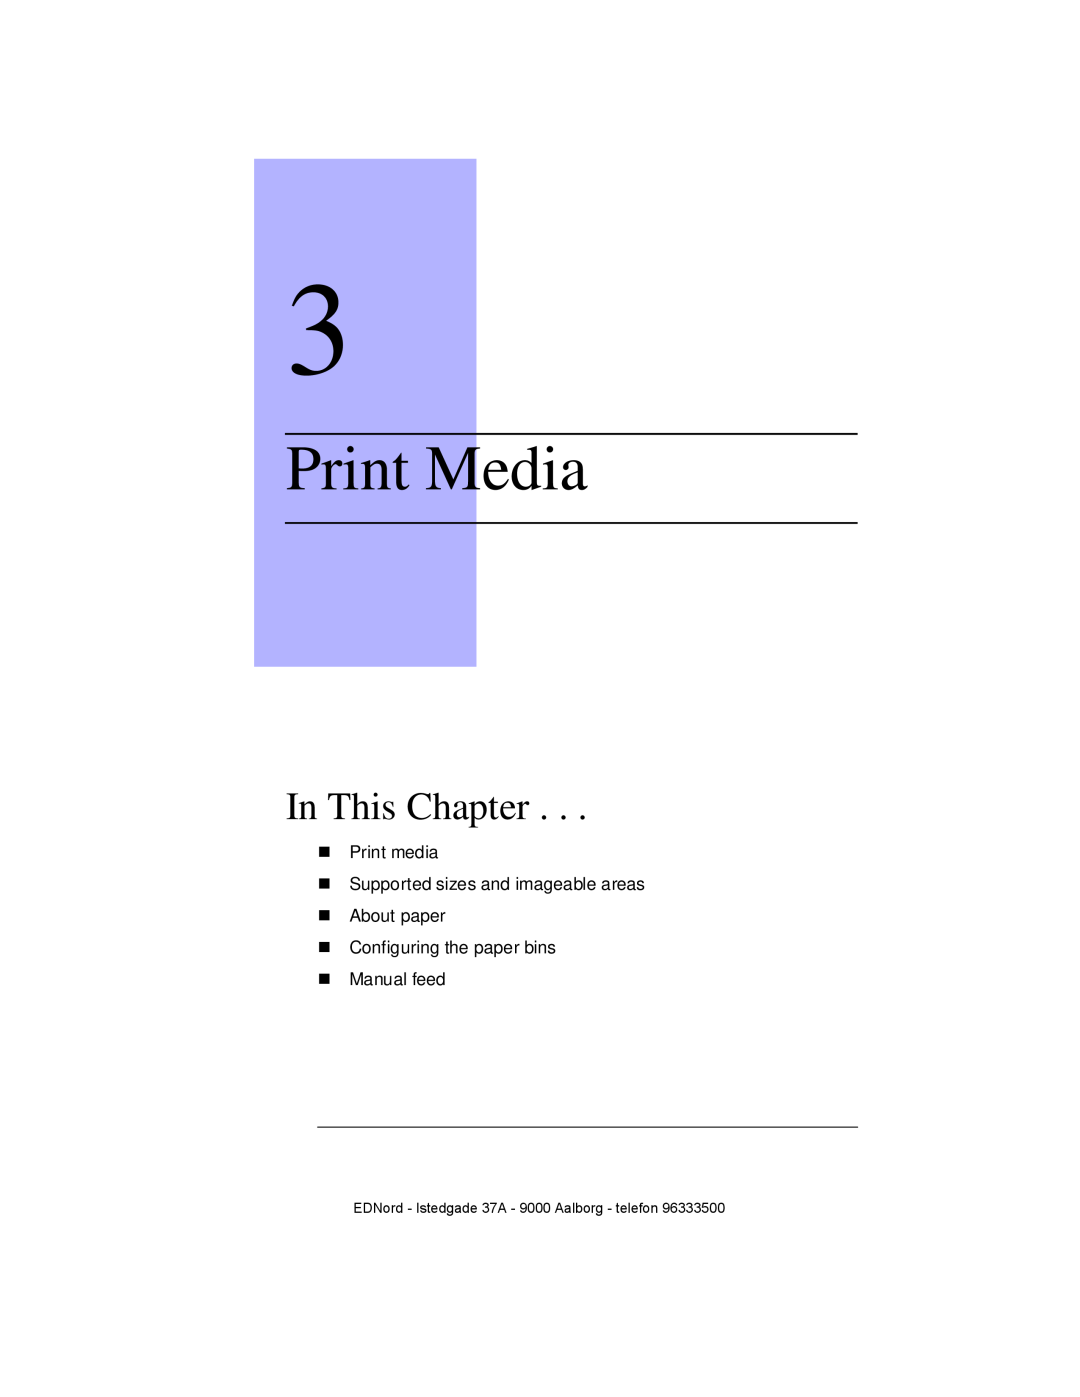 IBM QMS 4525 manual Print Media, In This Chapter, „ Print media „ Supported sizes and imageable areas „ About paper 